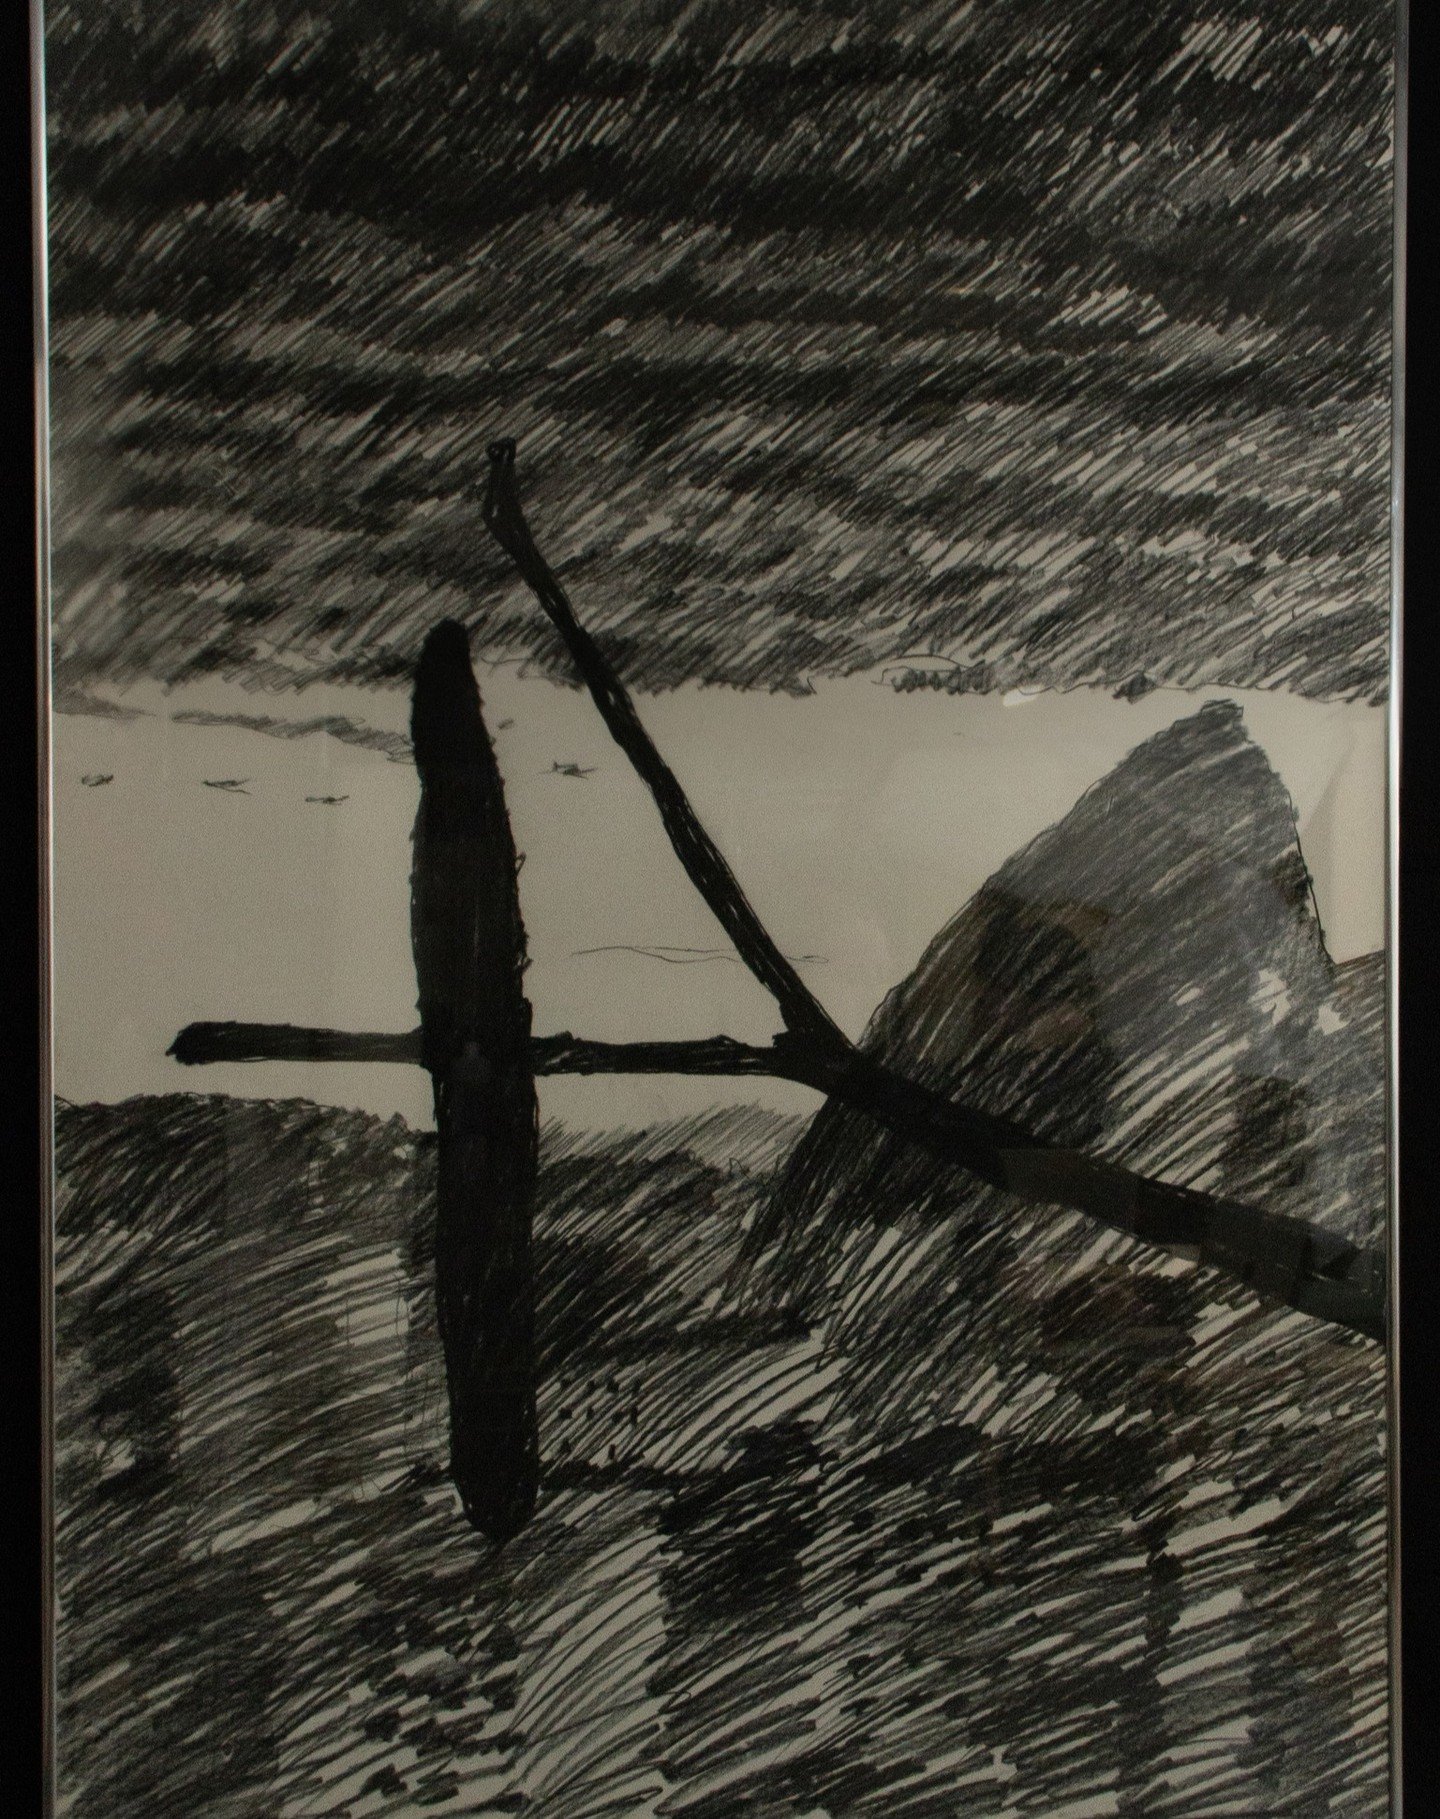 Happy Siblings Day! Alan created this charcoal for his brother, John, when John and his wife Clarice were living in Rio de Janeiro in the early 80s. It captures a parrot with the famous Sugar Loaf Mountain (P&atilde;o de A&ccedil;&uacute;car). Check 